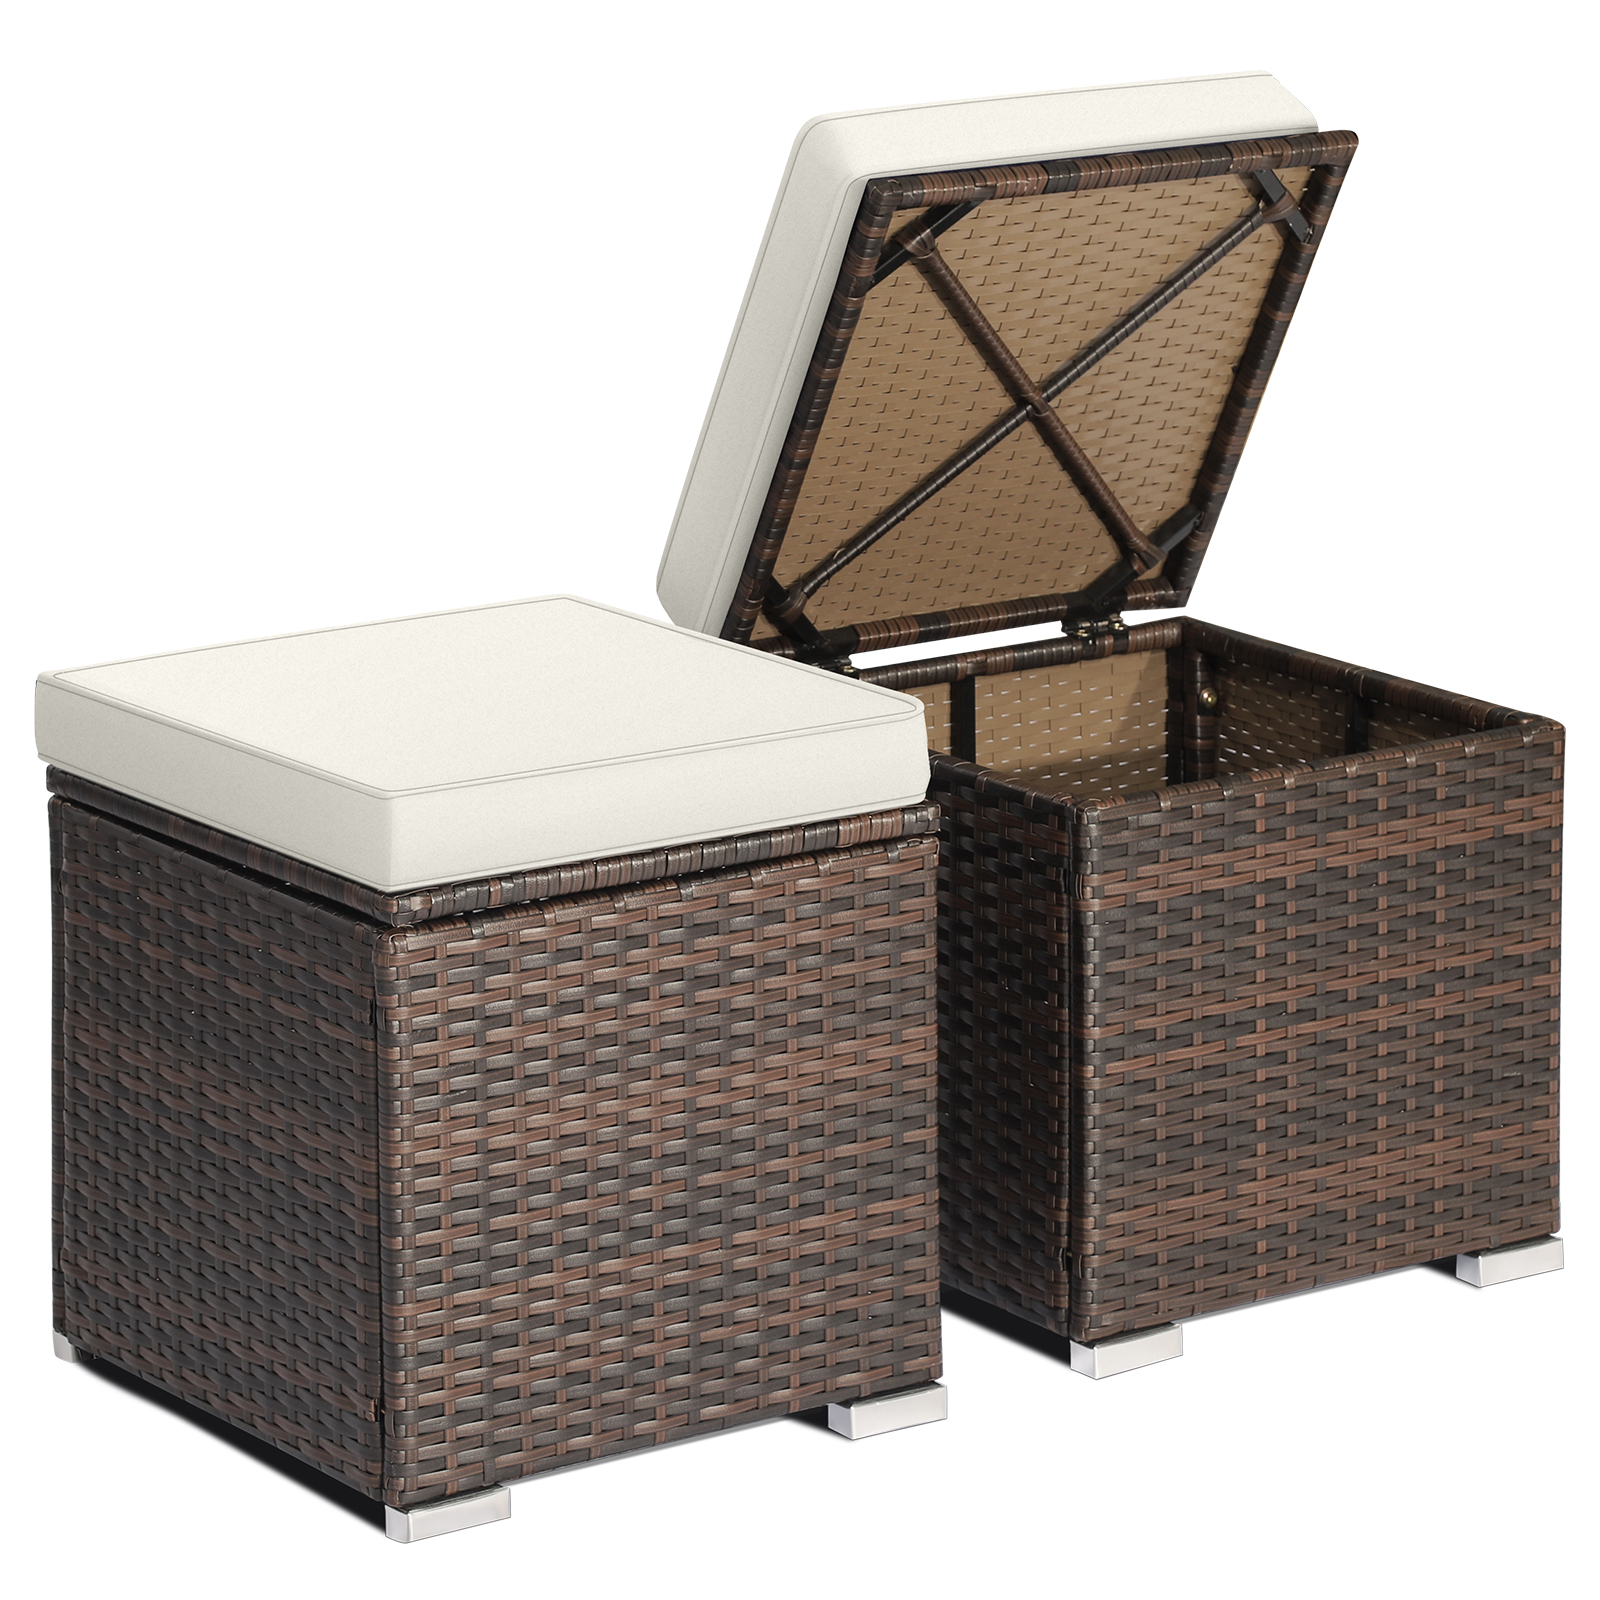 Topbuy 2 Pieces Patio Ottoman Multipurpose Outdoor Wicker Footstool Storage Box Side Table w/ Solid Metal Frame w/ Removable Cushions Off White - image 1 of 7